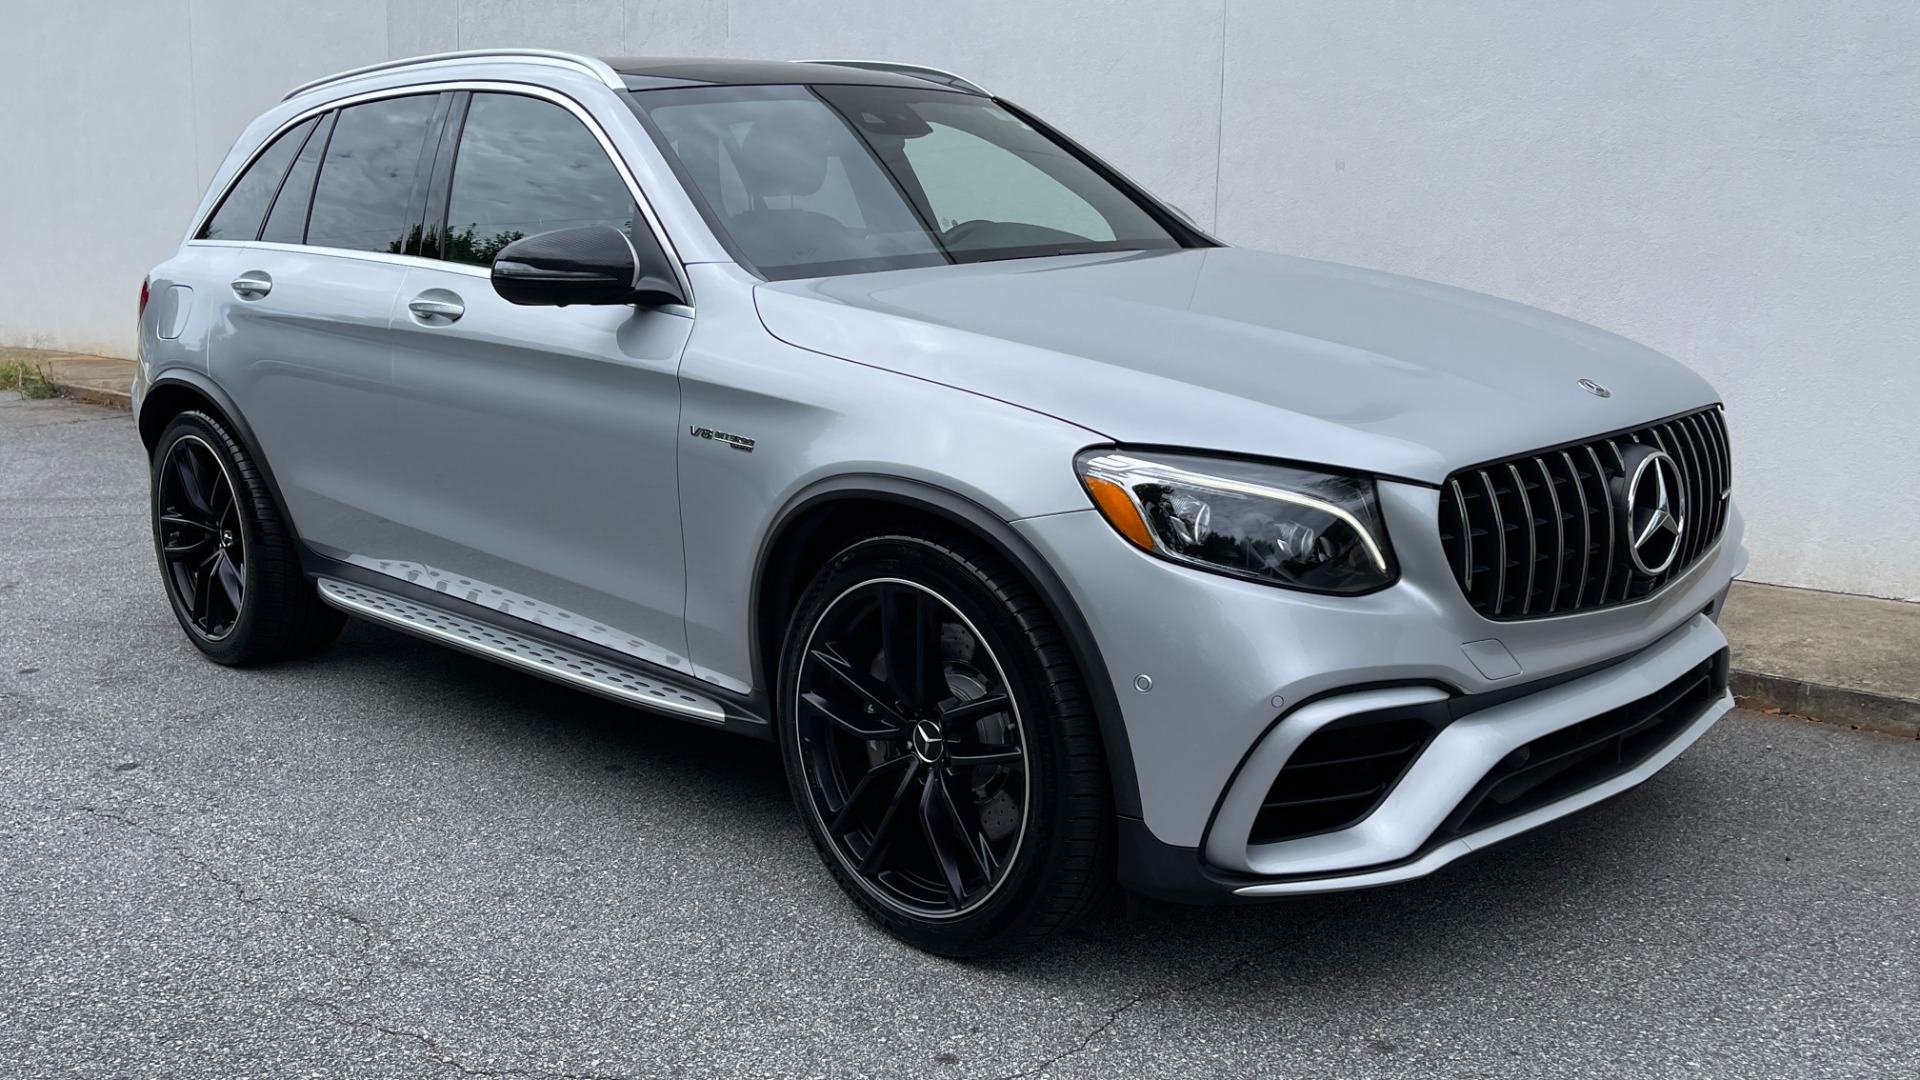 Used 2019 Mercedes-Benz GLC AMG GLC 63 / 4MATIC+ / PANORAMIC ROOF / CARBON FIBER / LIGHT PACKAGE / PERF for sale $66,495 at Formula Imports in Charlotte NC 28227 2